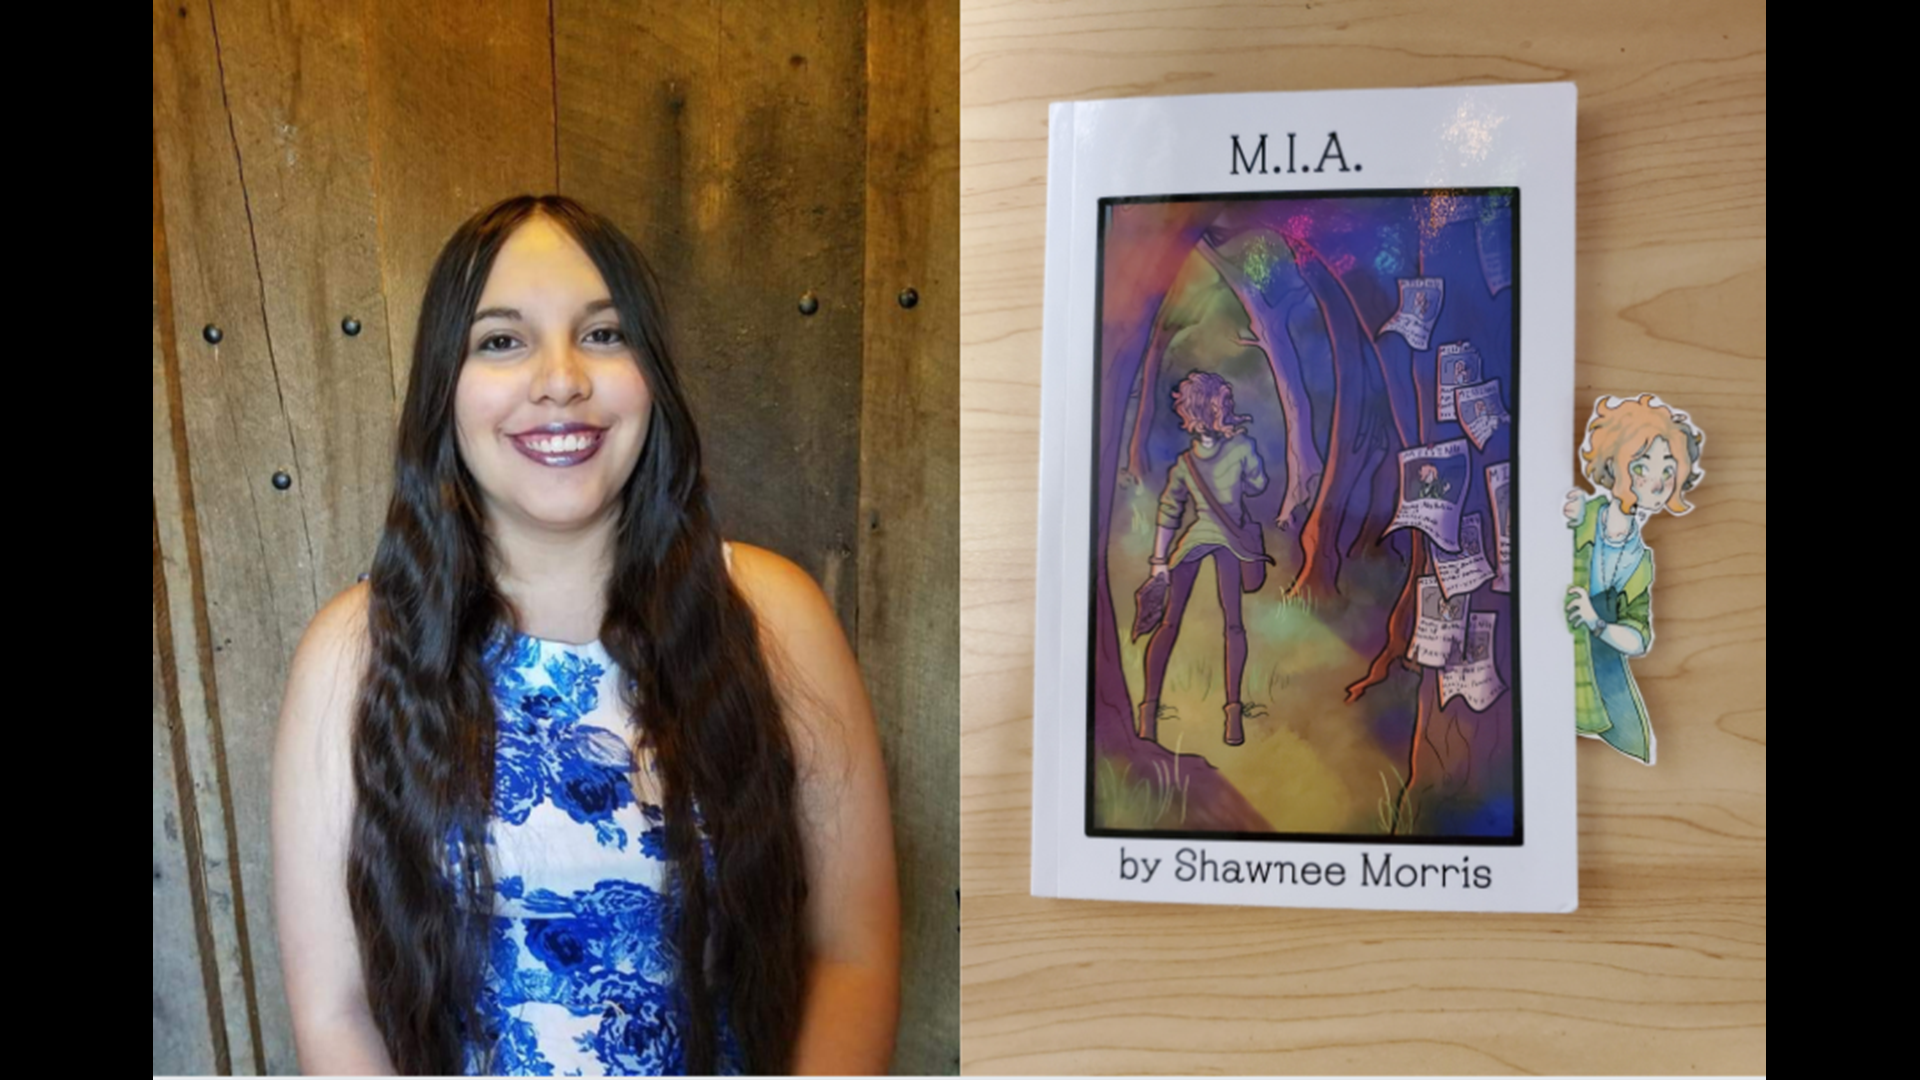 Shawnee Morris is only 17 years old and is already a published author of two books: M.I.A. and M.I.A. and the Book of Damien.